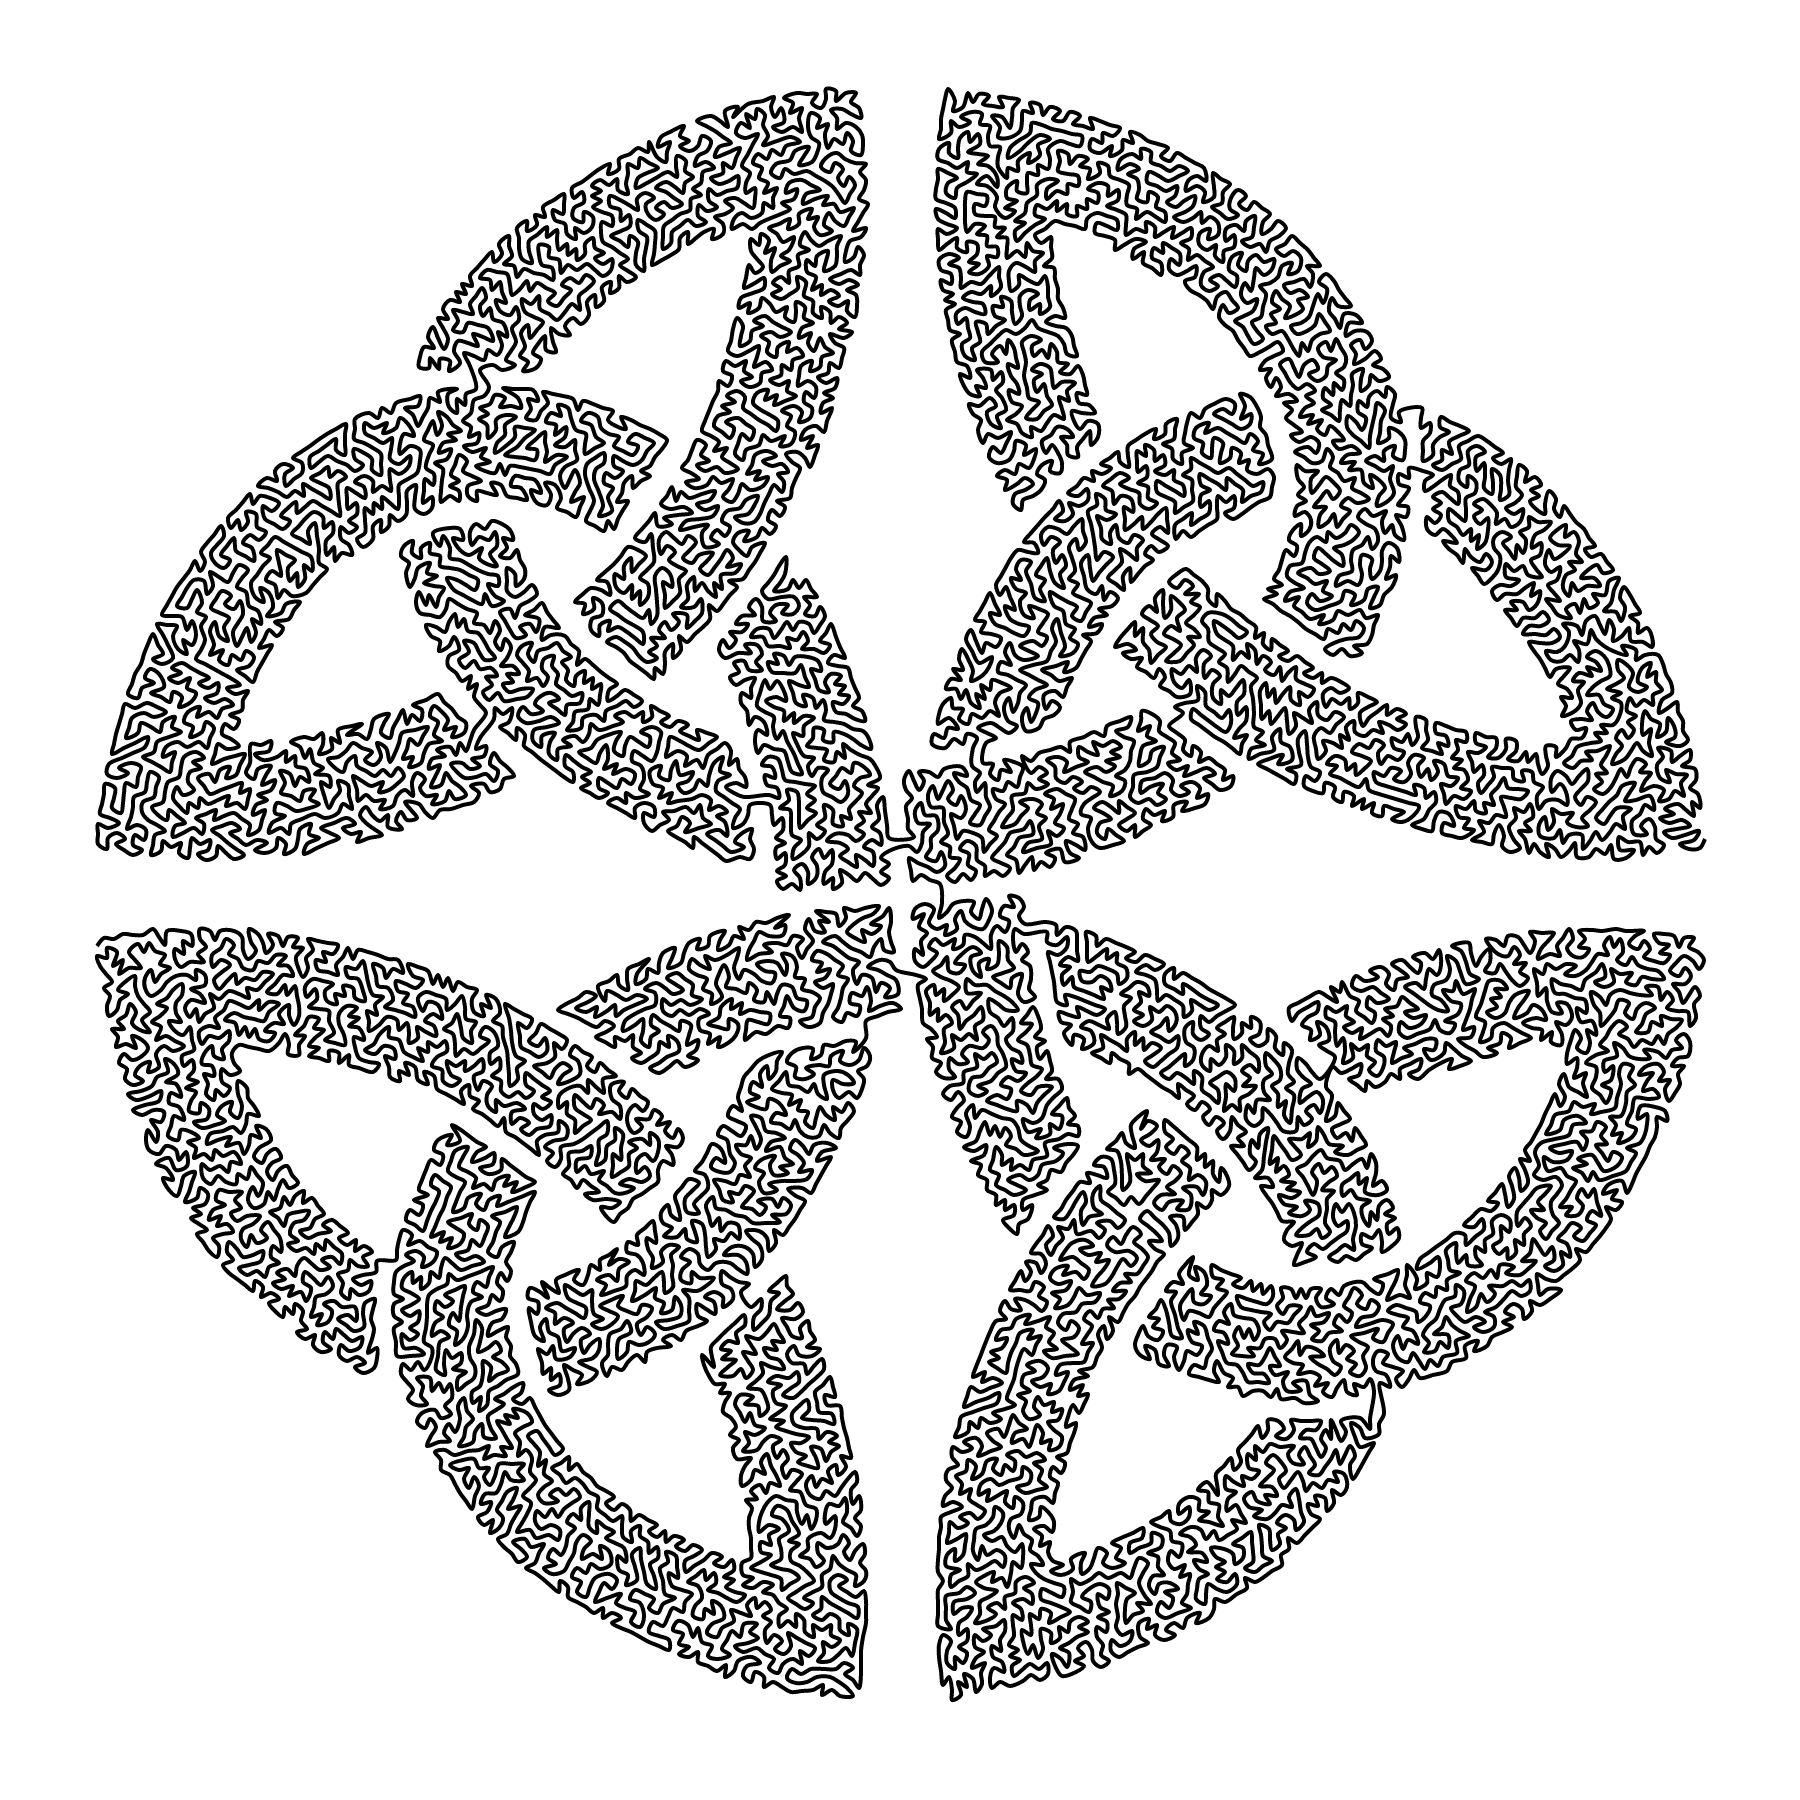 A keltic knot, but even knottier as thick bands are drawn with a single, space filling line